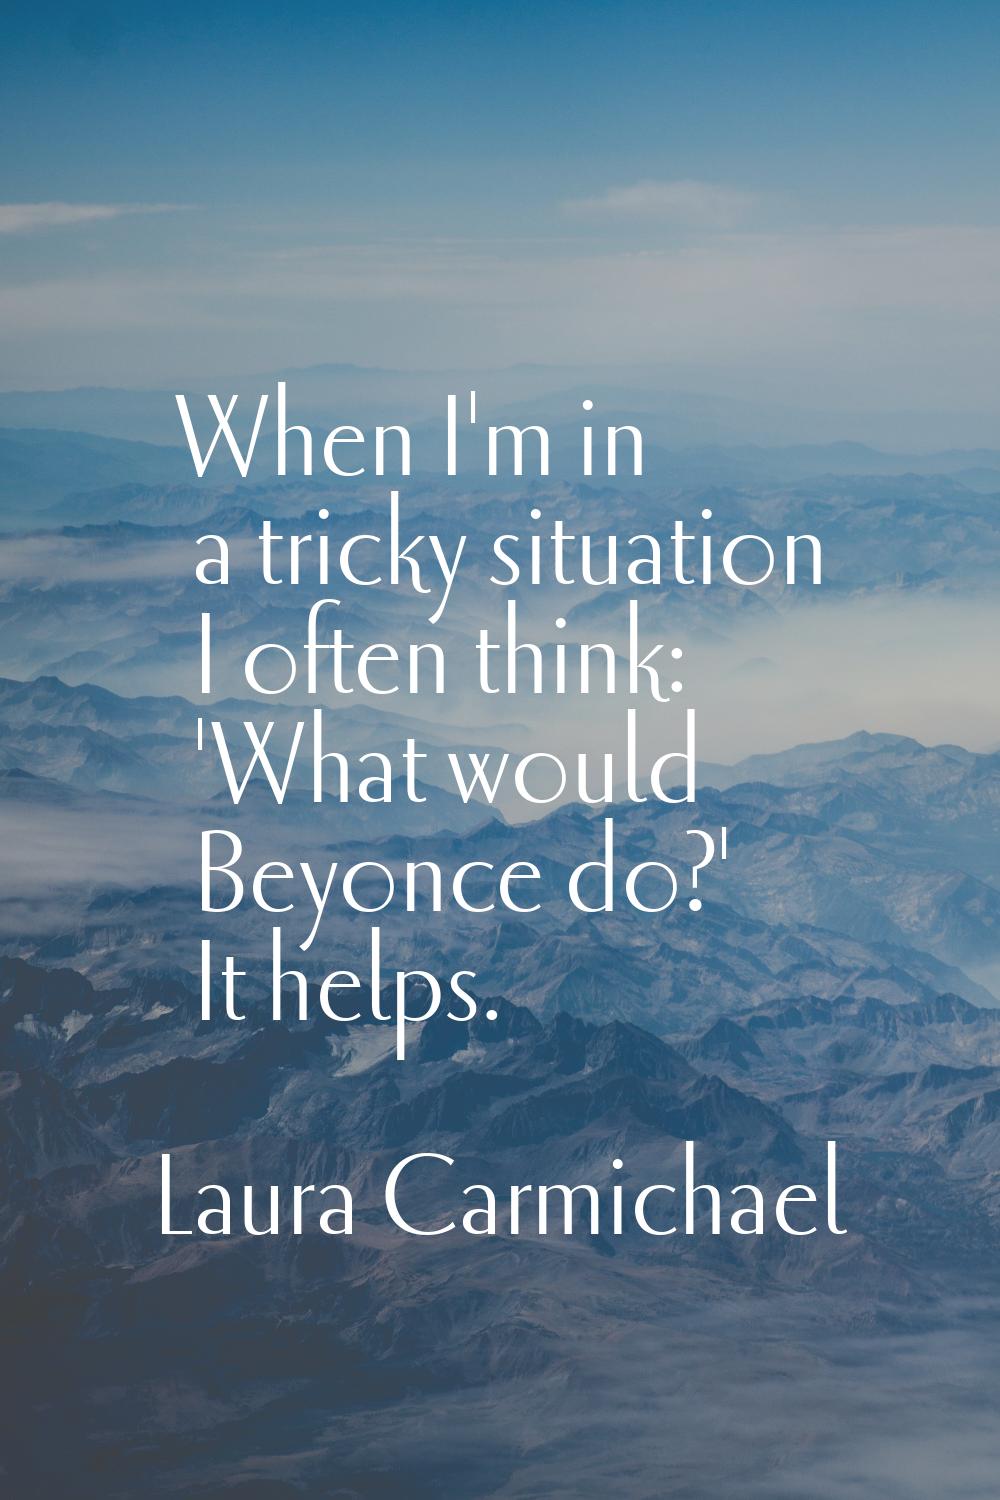 When I'm in a tricky situation I often think: 'What would Beyonce do?' It helps.